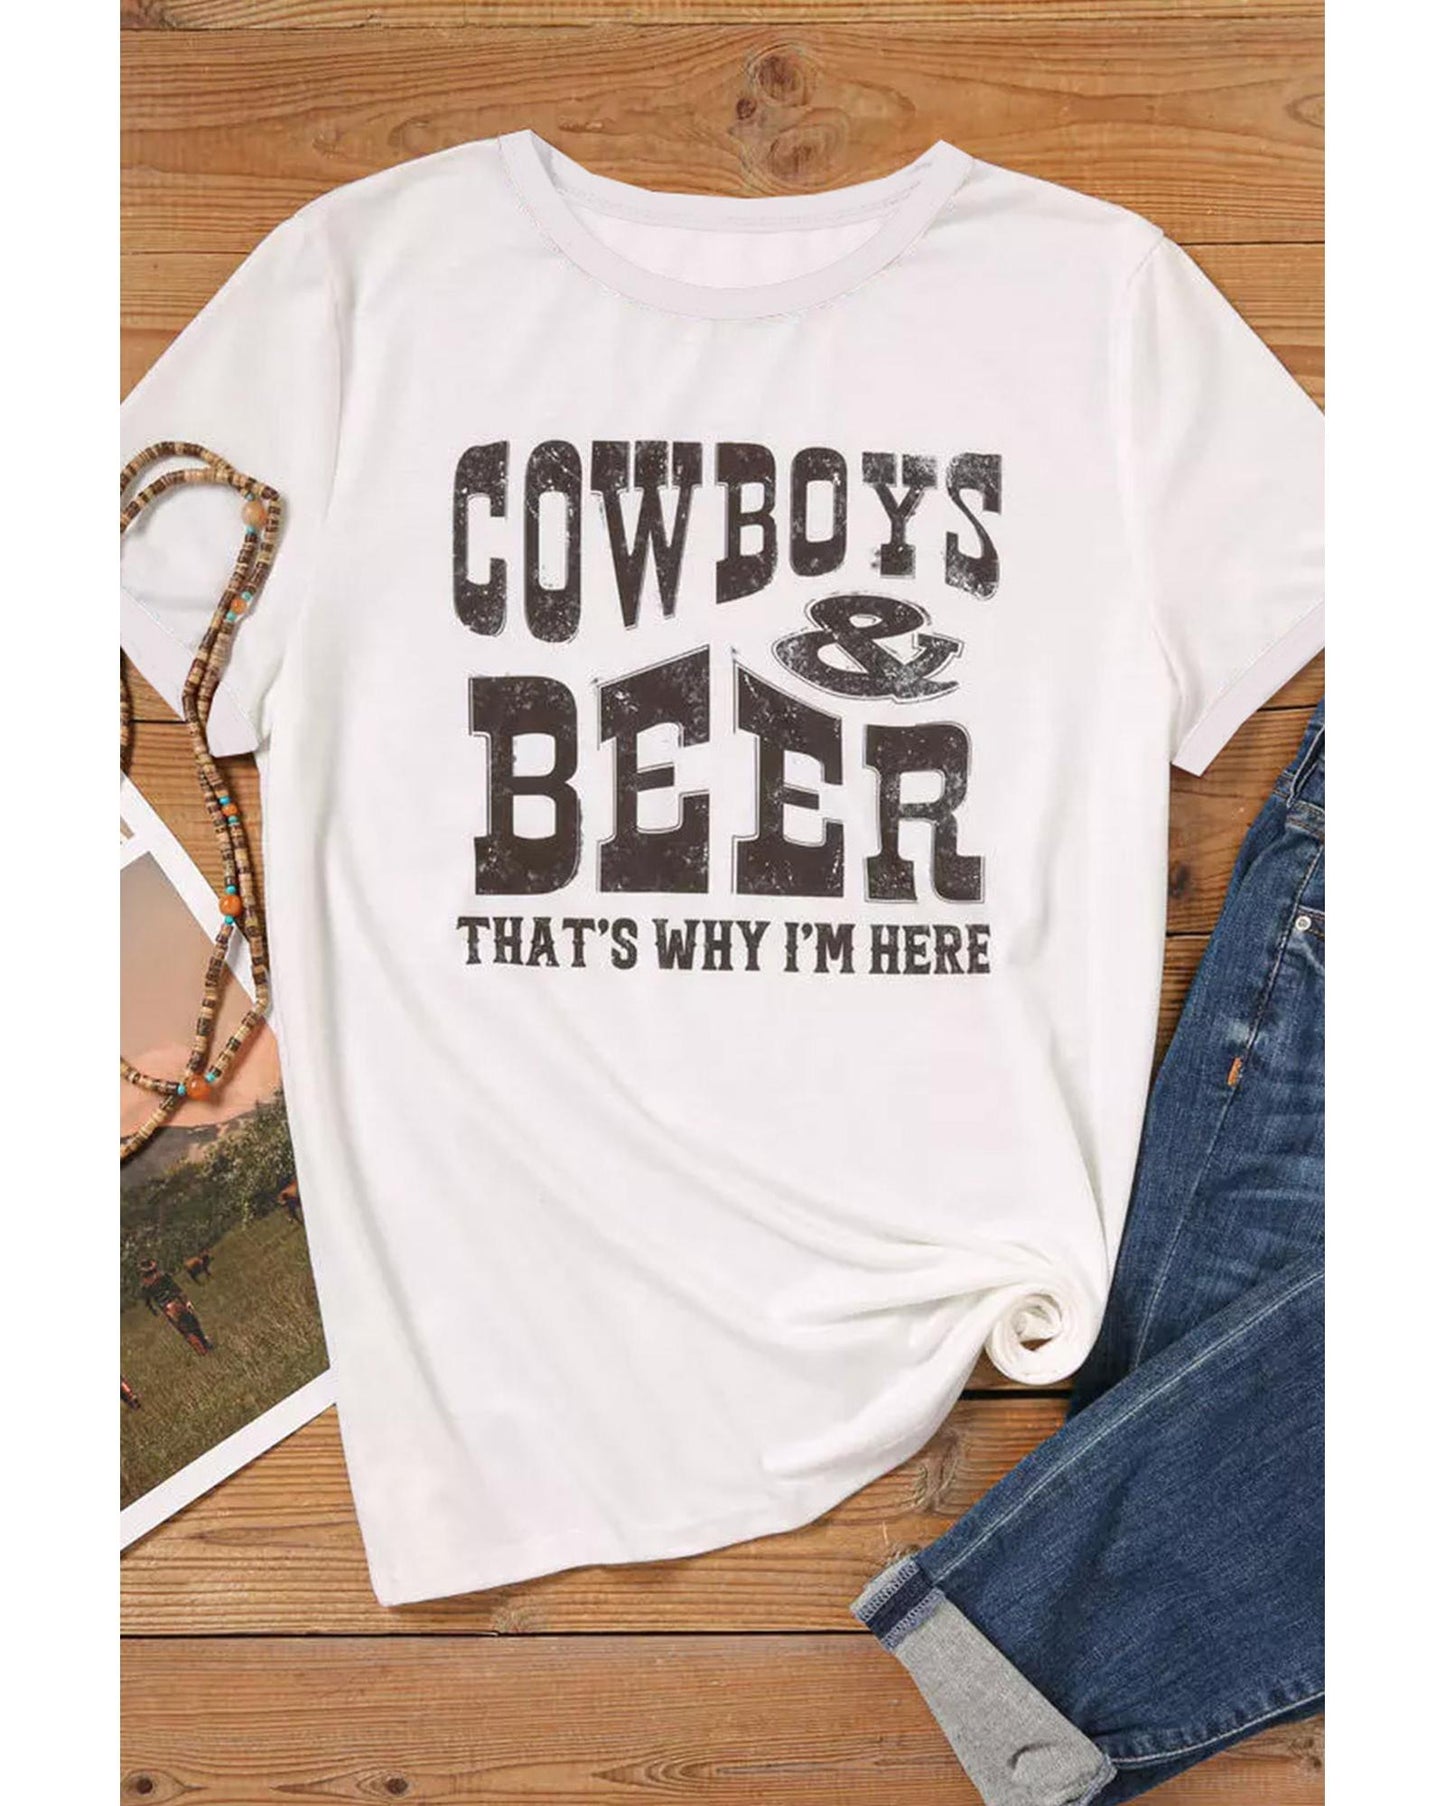 Azura Exchange COW BOYS & BEERS Letters Graphic T-shirt - XL